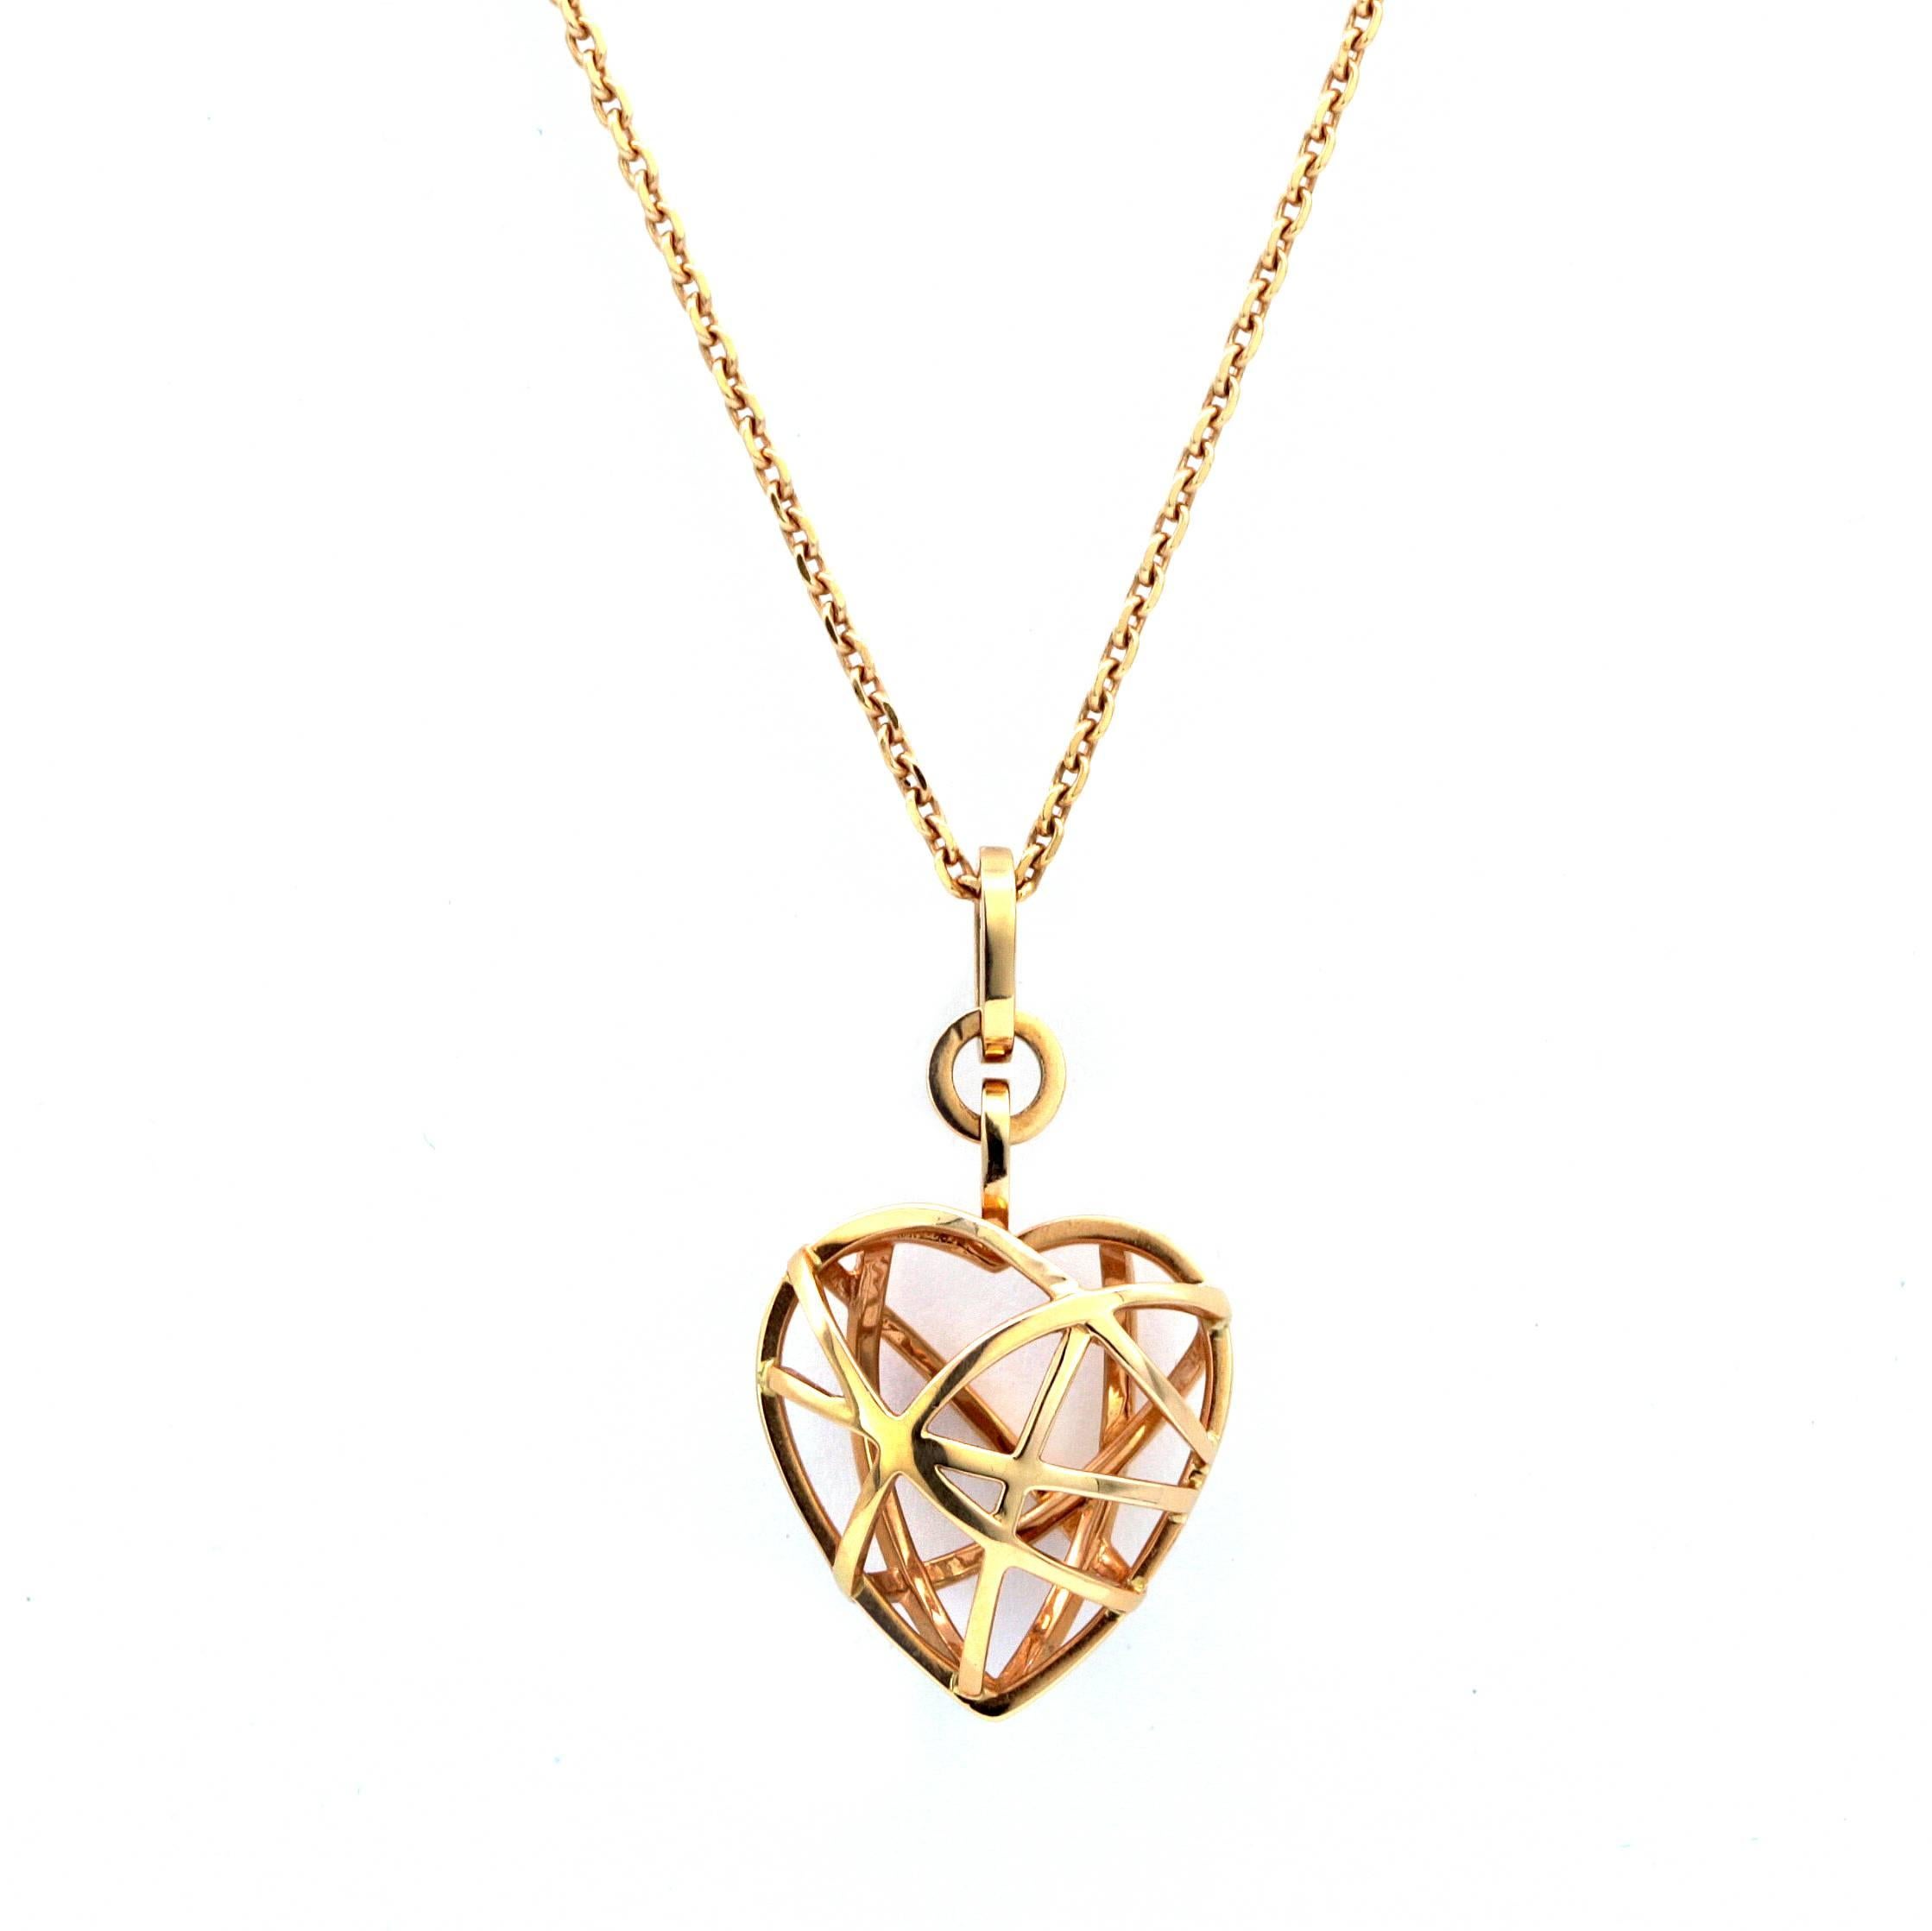 Chopard 18 Karat Rose Gold Guli Heart Pendant with Chain Necklace For Sale